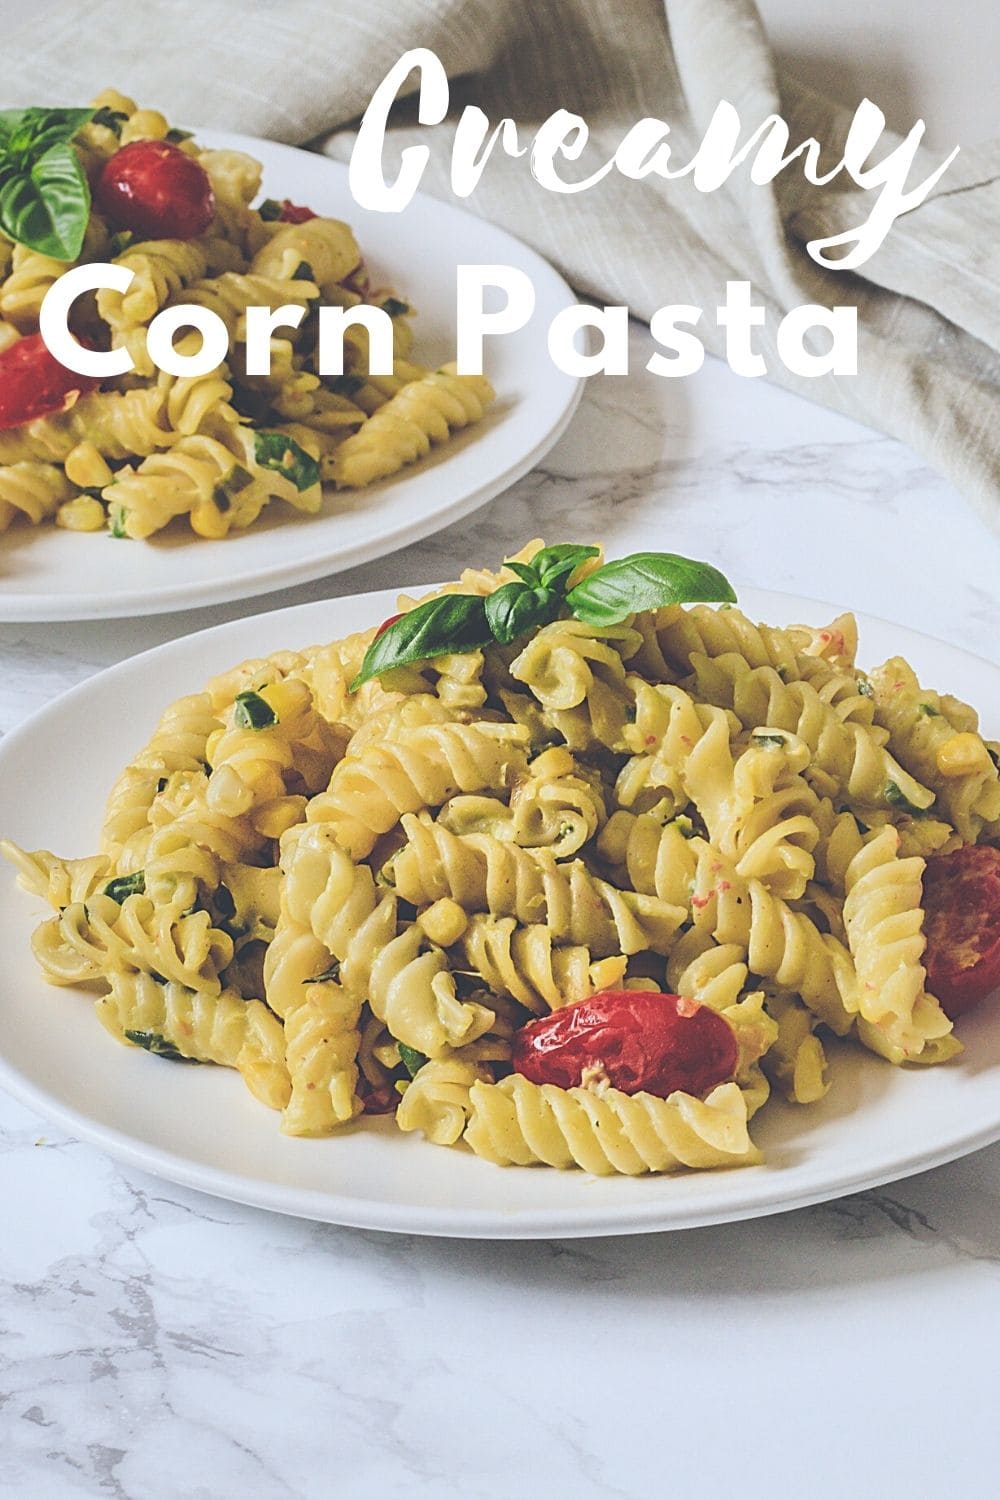 Creamy corn pasta on a plate with garnish of basil leaves, another plate on back with napkin and text on top of the image